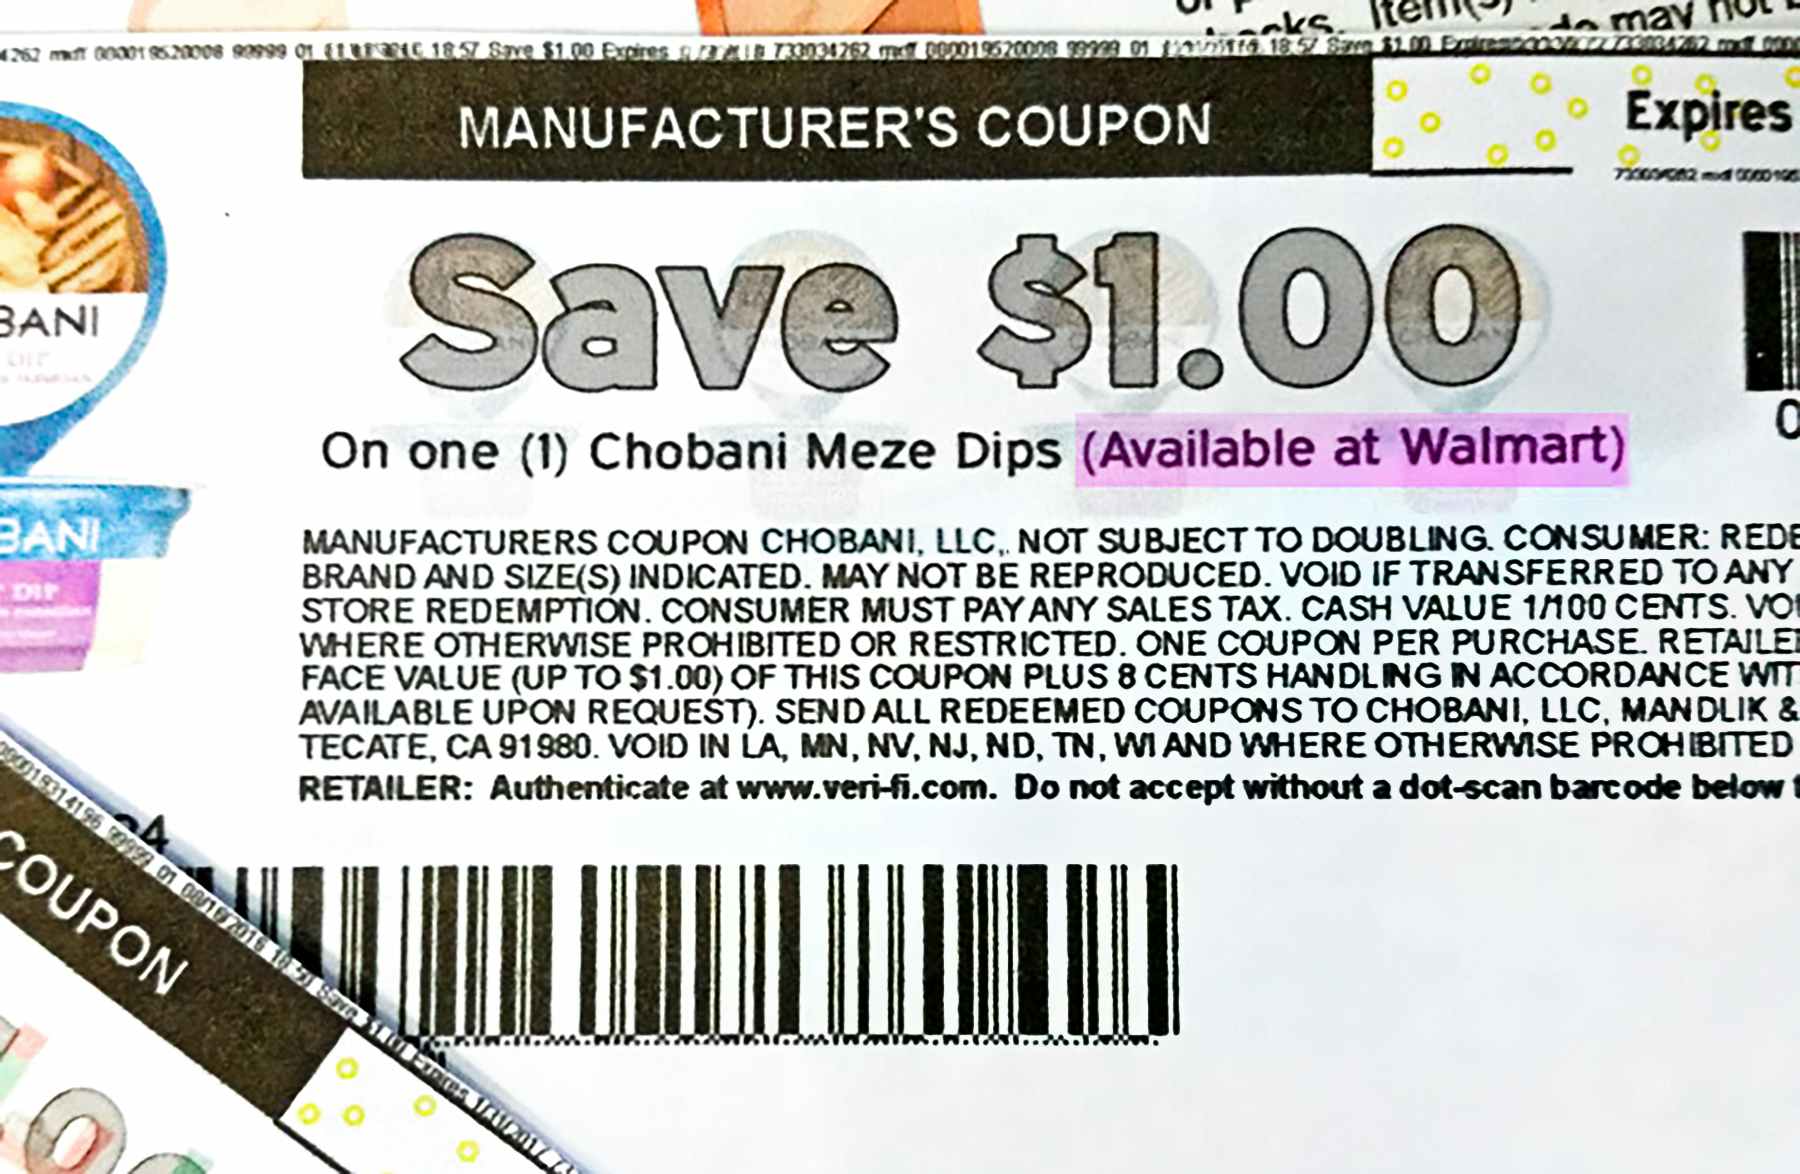 coupon-fine-print-available-at-walmart-reuploaded